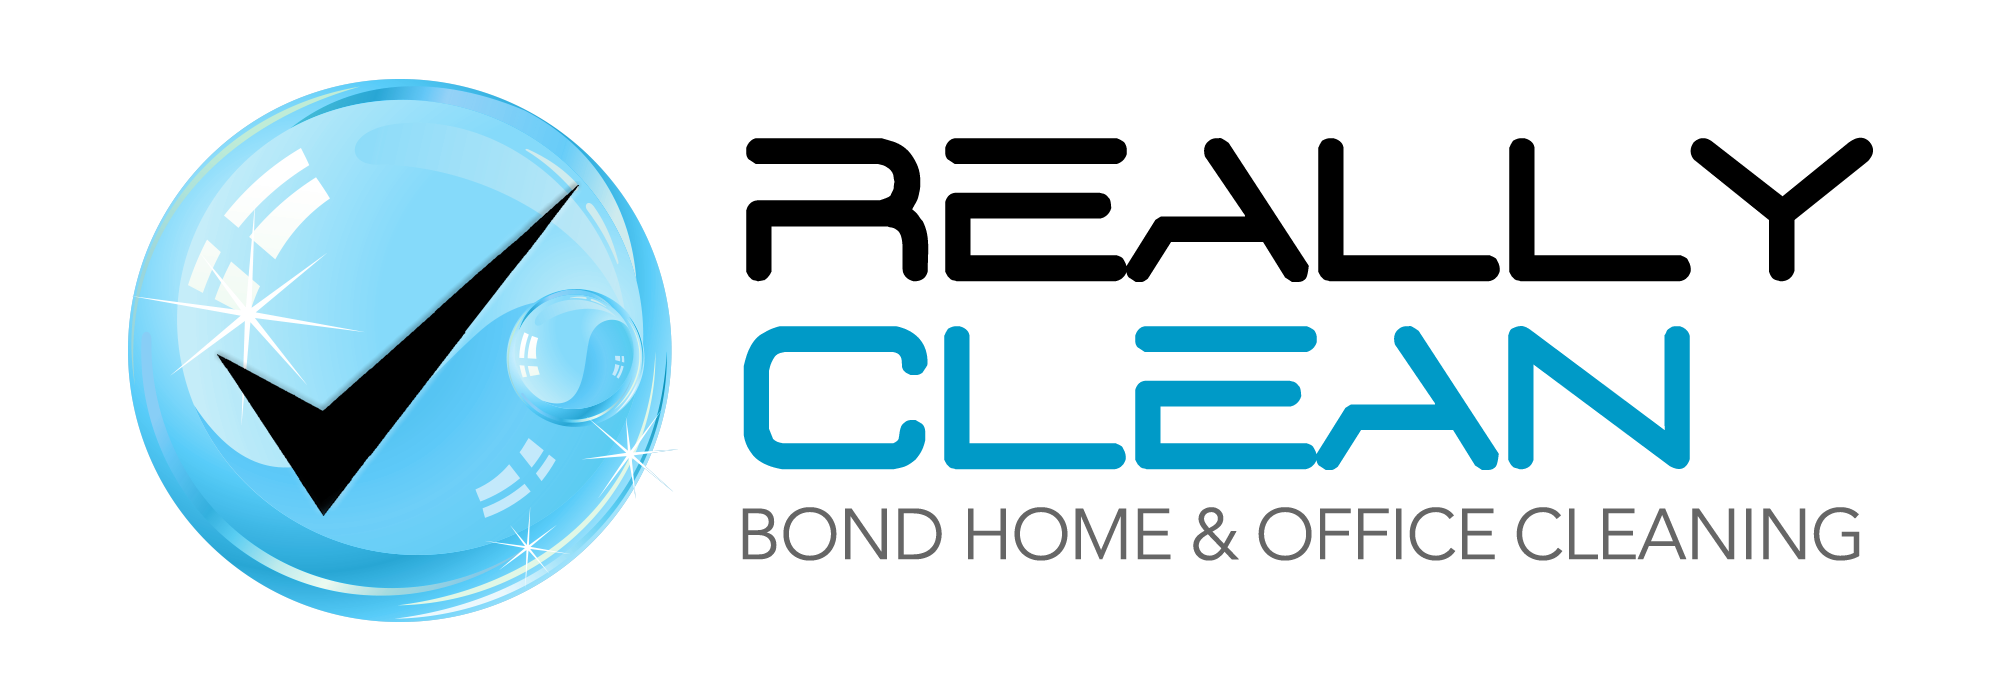 Really Clean Bond Home & Office Cleaning